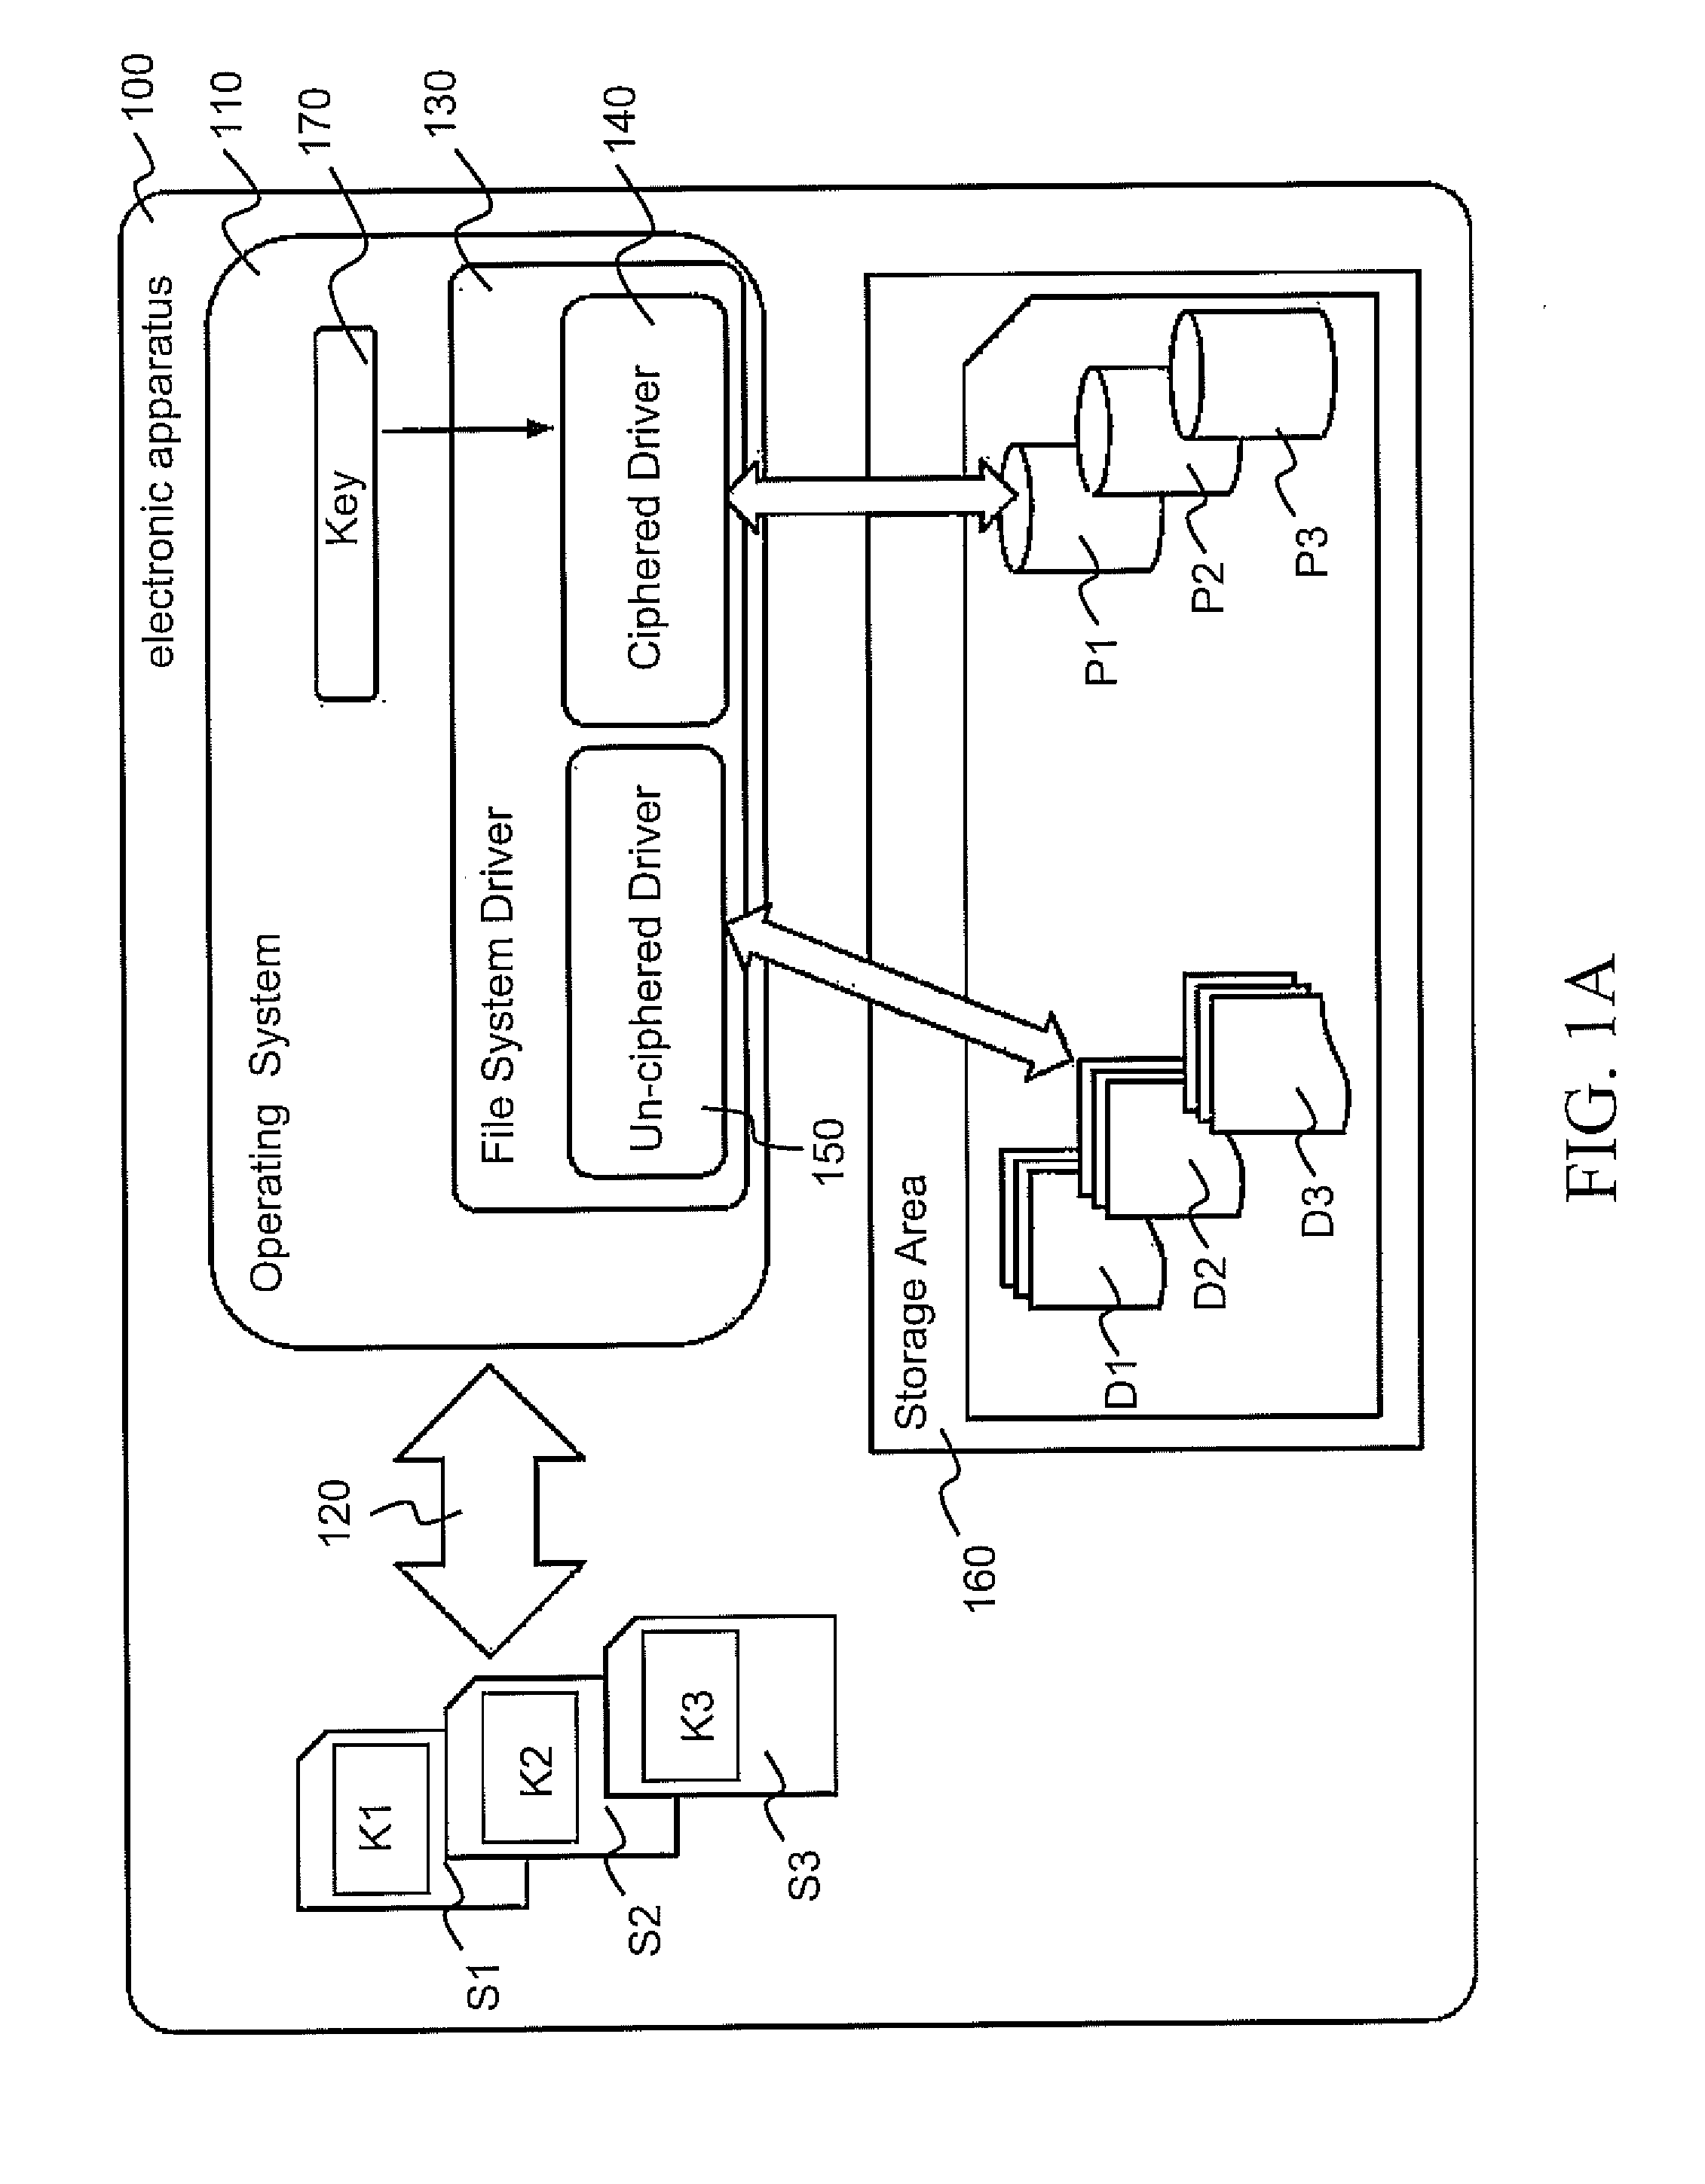 Method to access data in an electronic apparatus